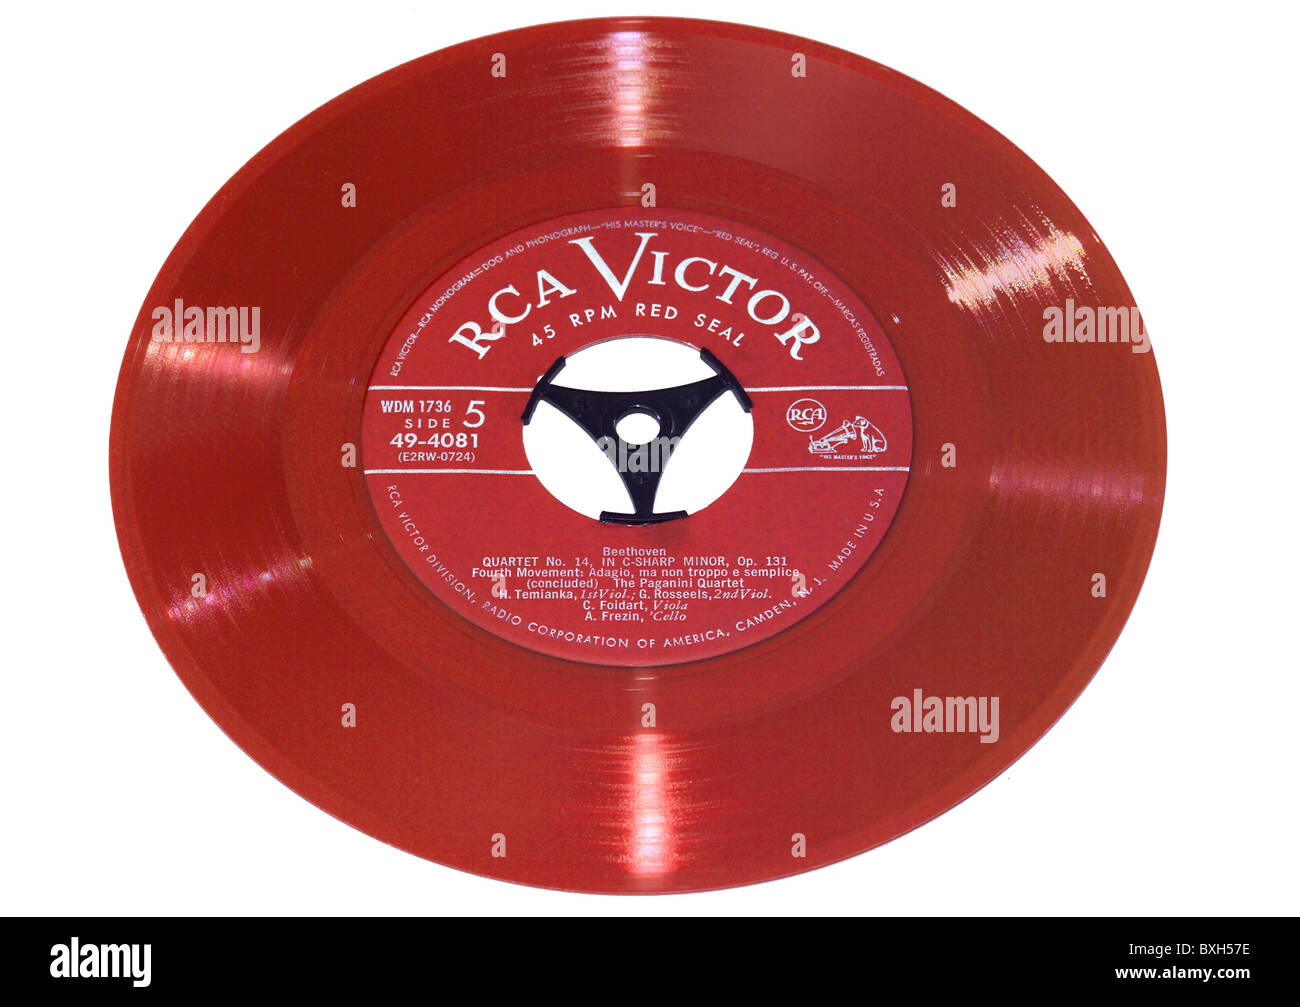 music, record, one of the first vinyl records, RCA Victor, Red seal, USA,  1949, Additional-Rights-Clearences-Not Available Stock Photo - Alamy